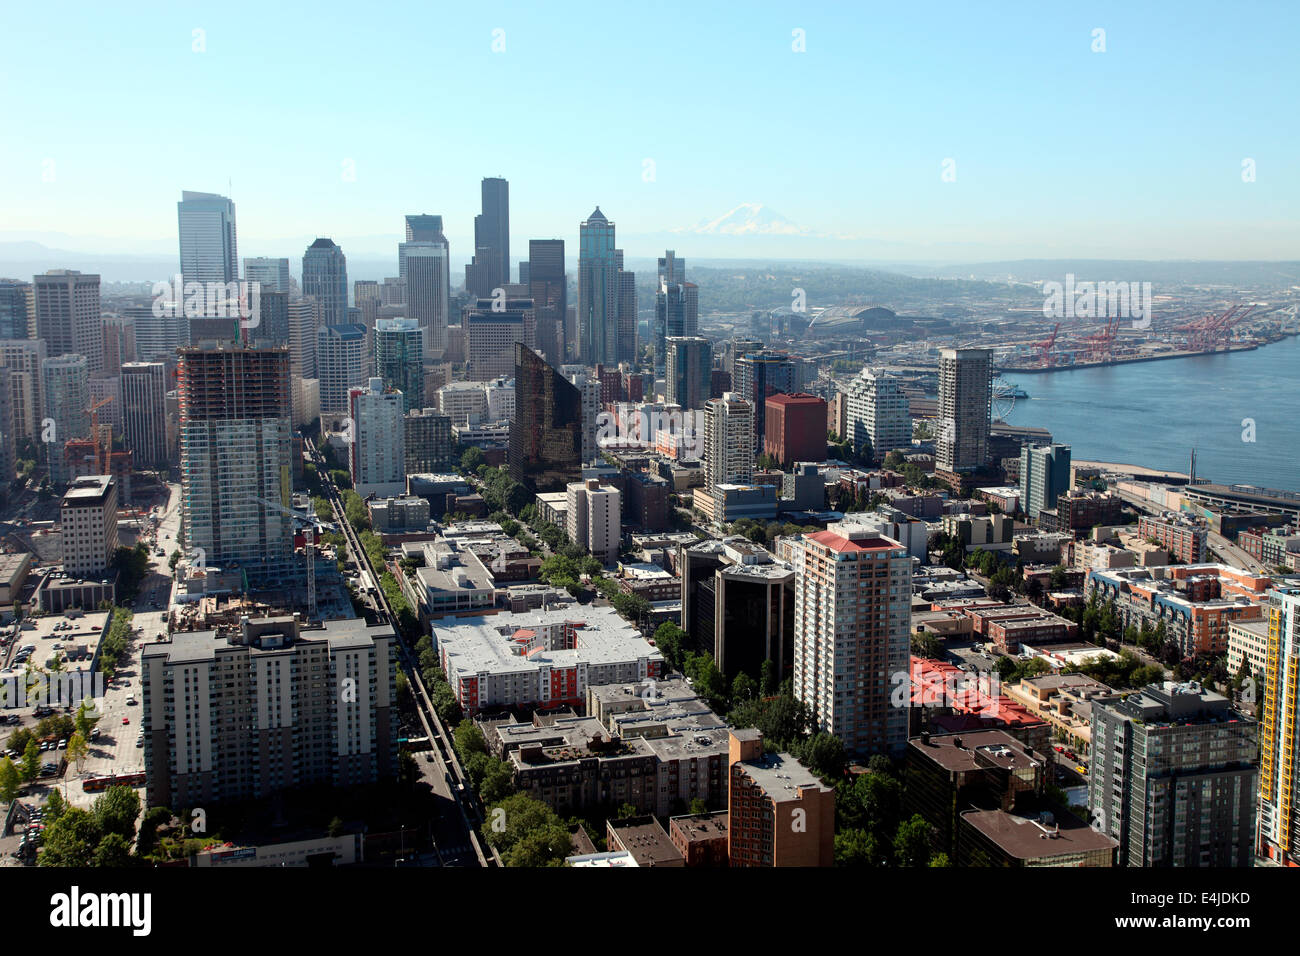 Seattle cityscape seen from the Observation platform of the Space Needle Stock Photo